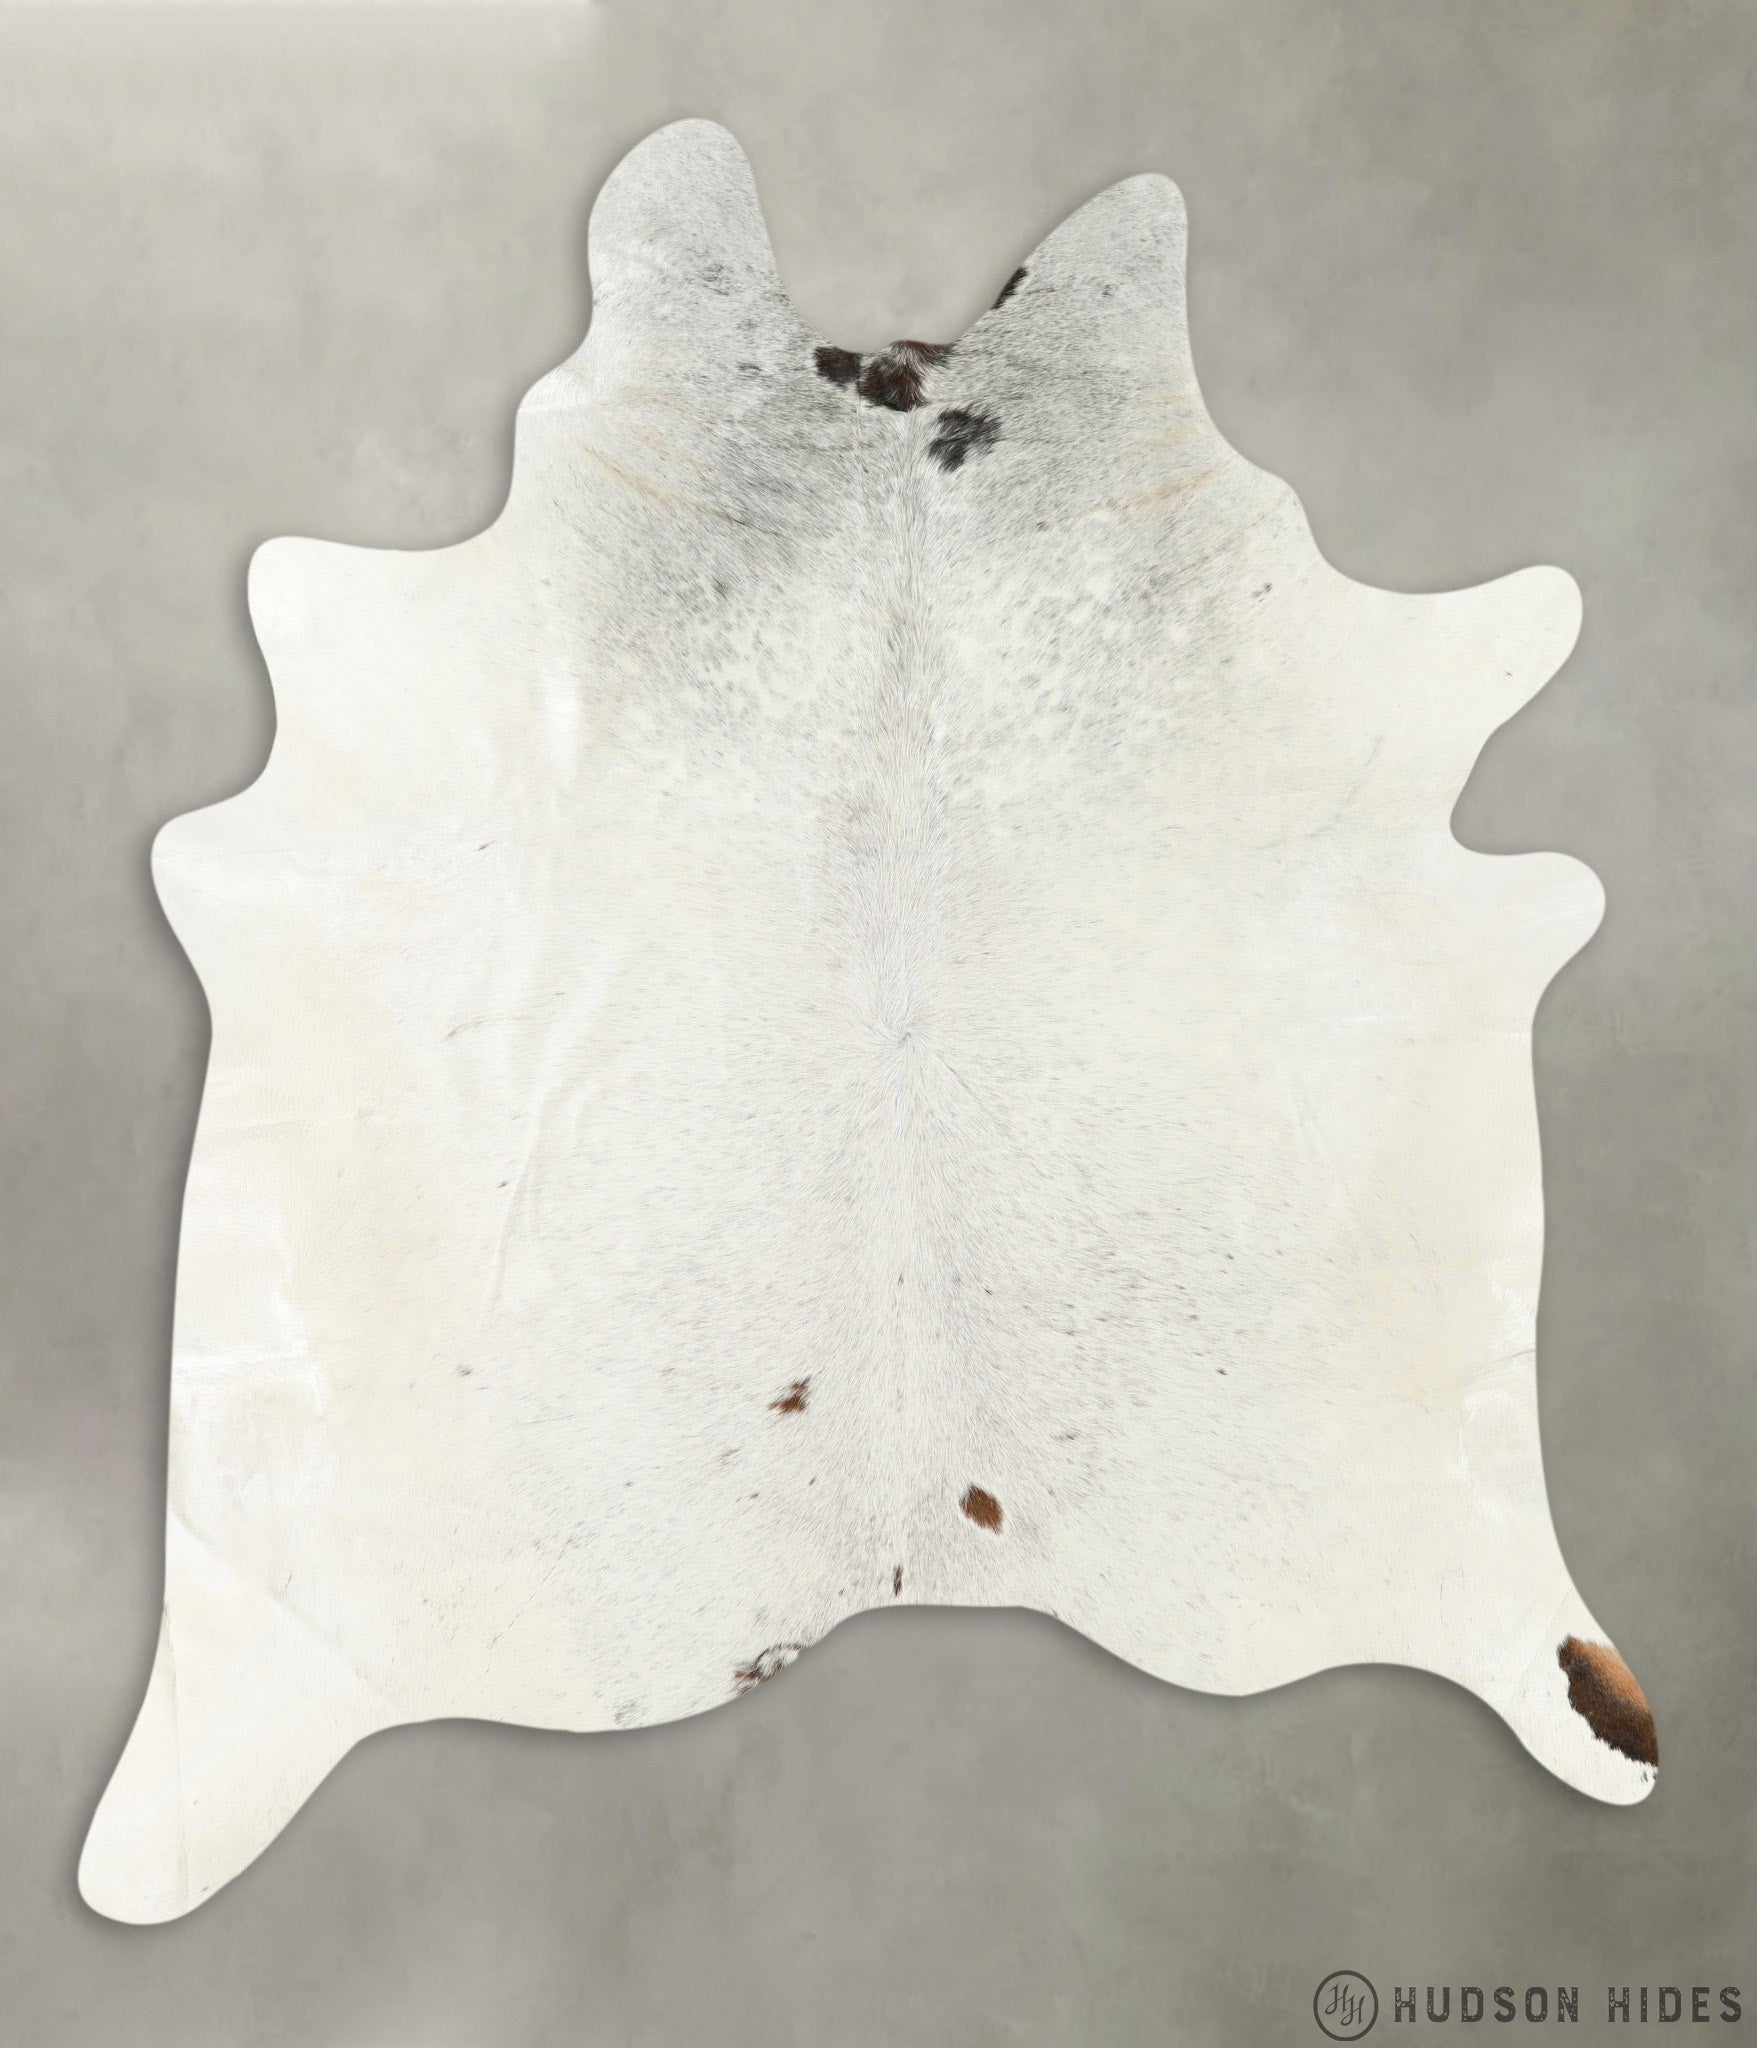 Salt and Pepper Brown X-Large Brazilian Cowhide Rug 7'4"H x 6'6"W #22751 by Hudson Hides